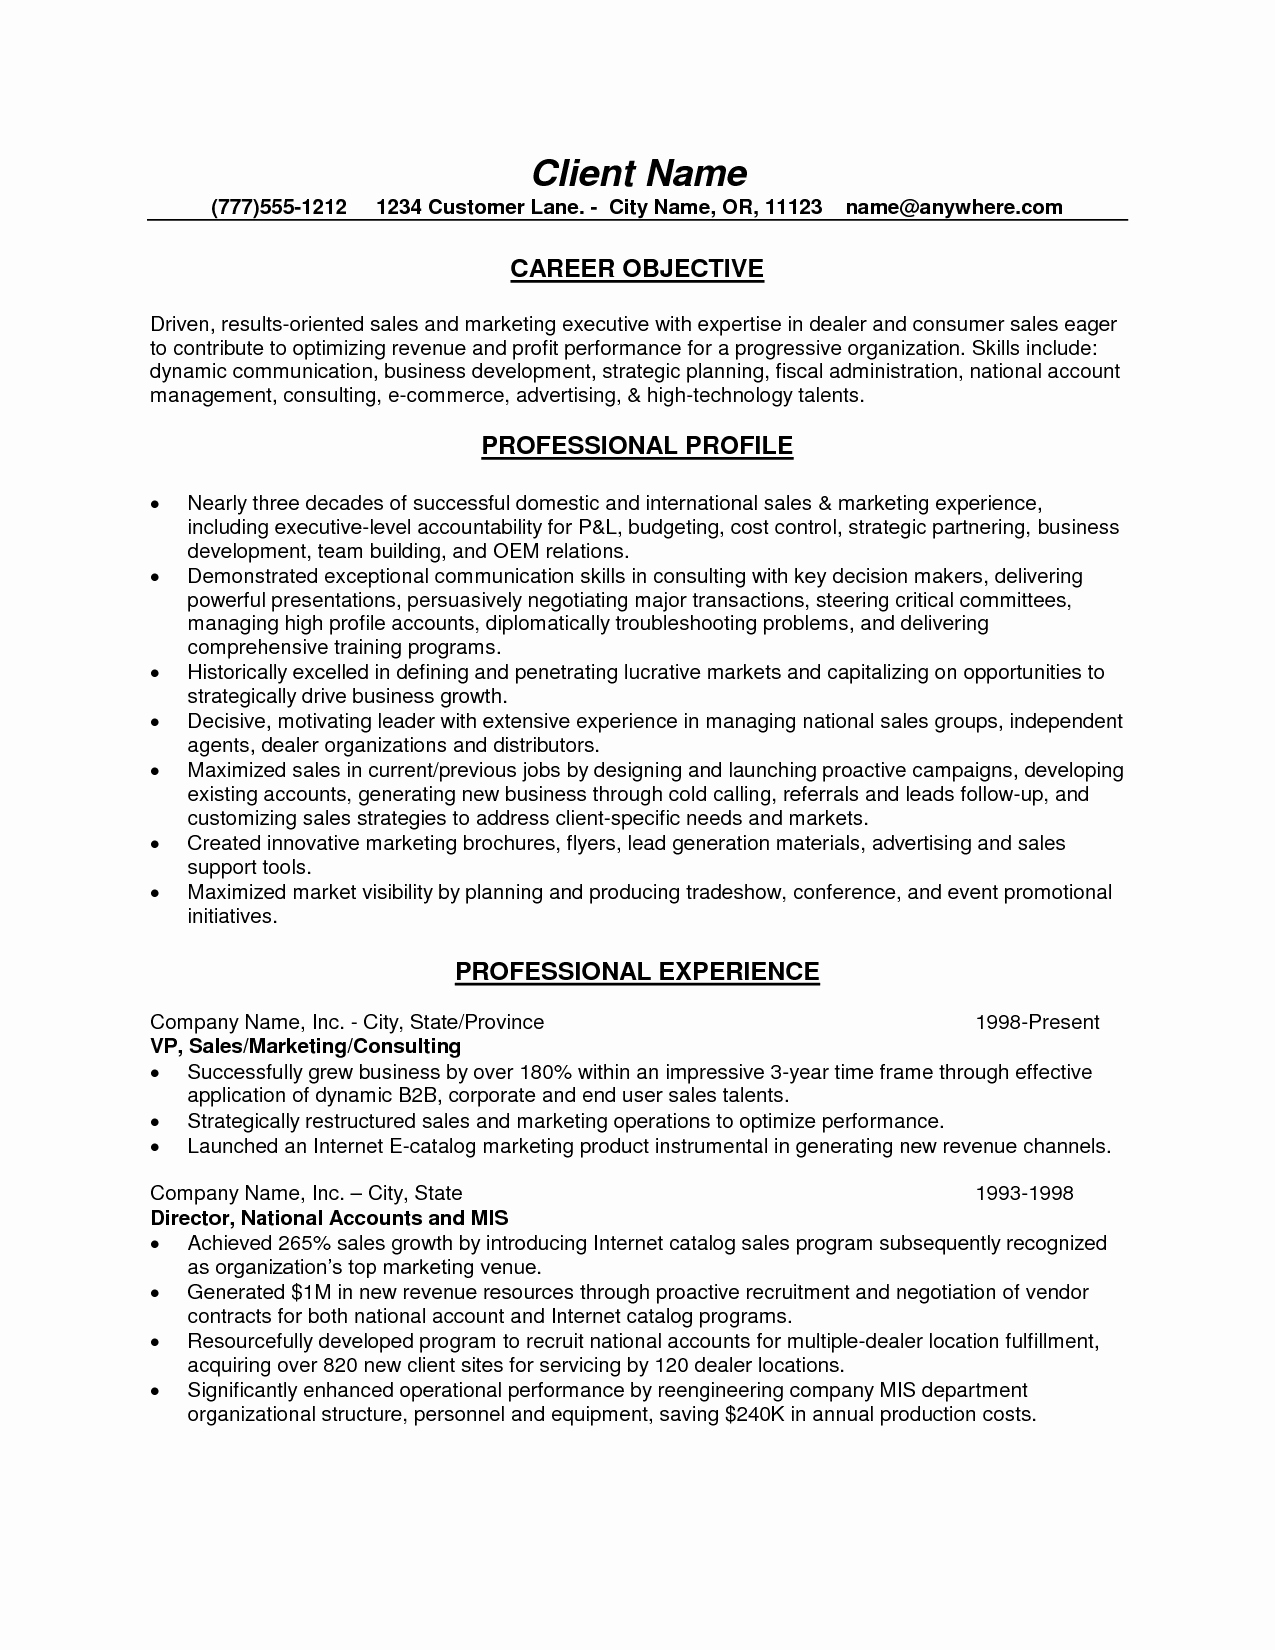 Good Resume Objective Paragraph